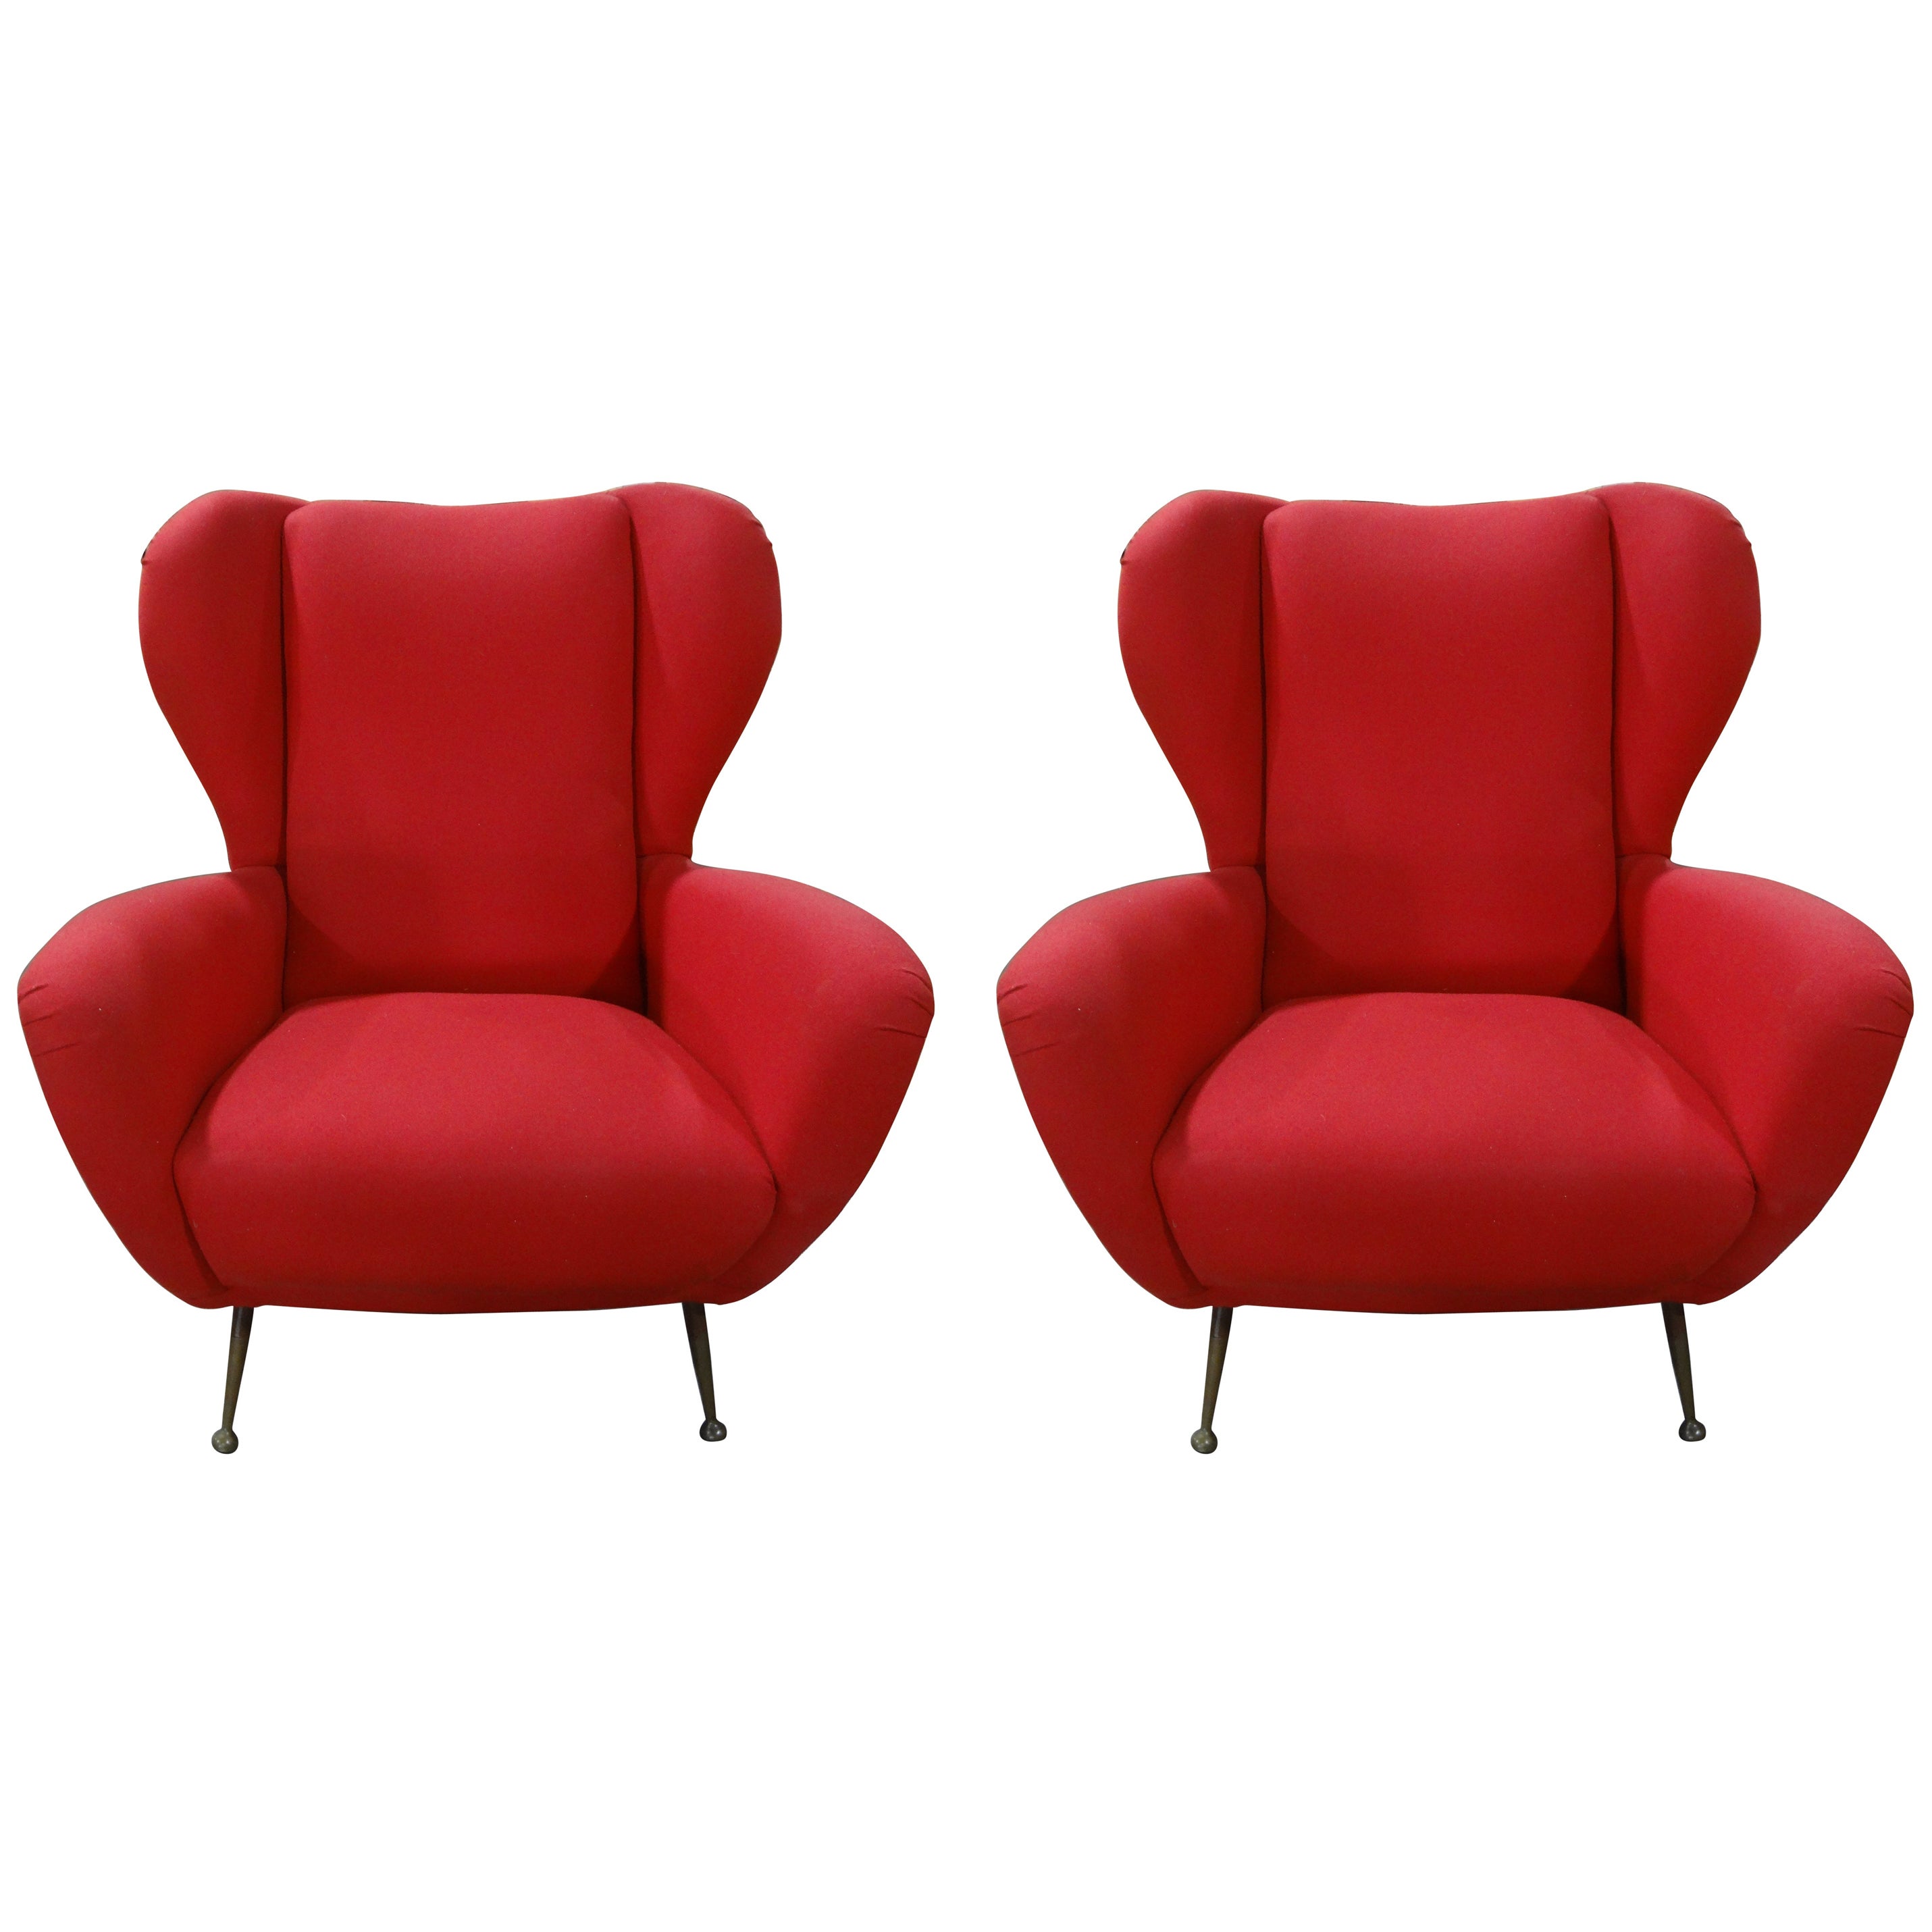 Pair Of Italian Modern Sculptural Lounge Chairs Inspired By Gio Ponti For Sale